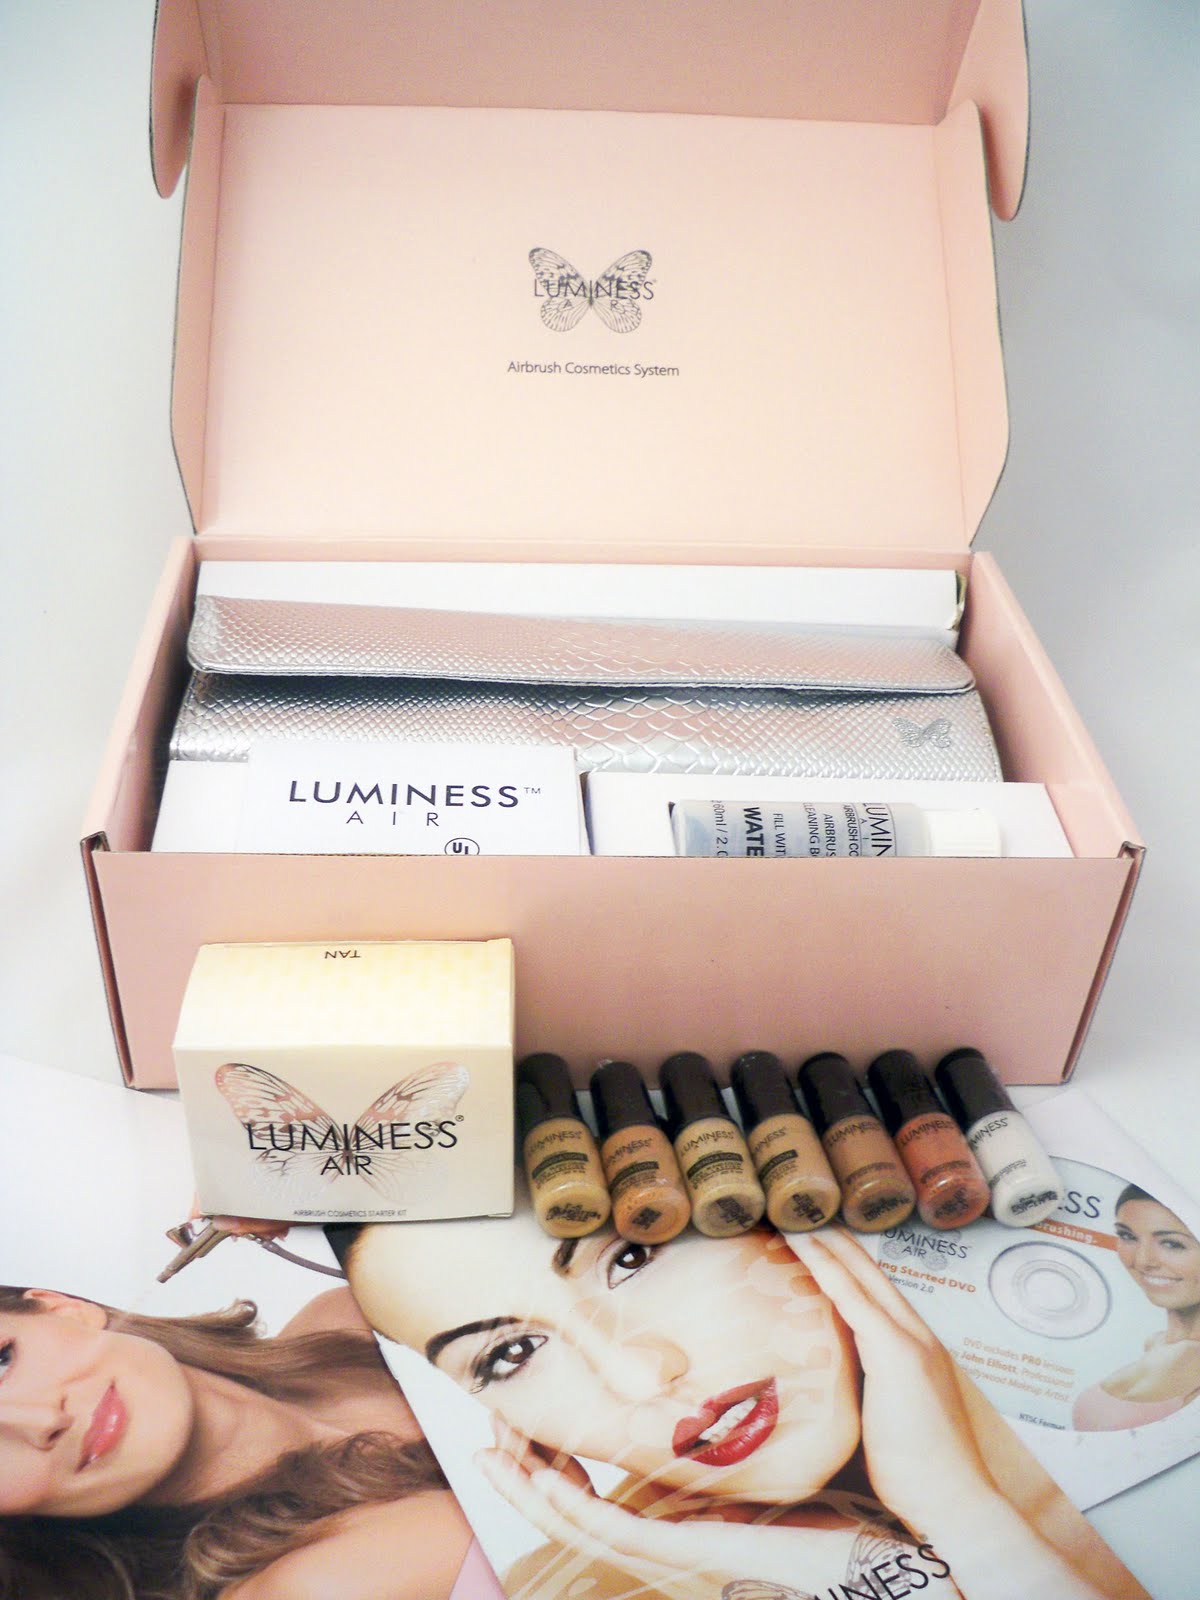 Luminess Airbrush Make-up system with makeup 